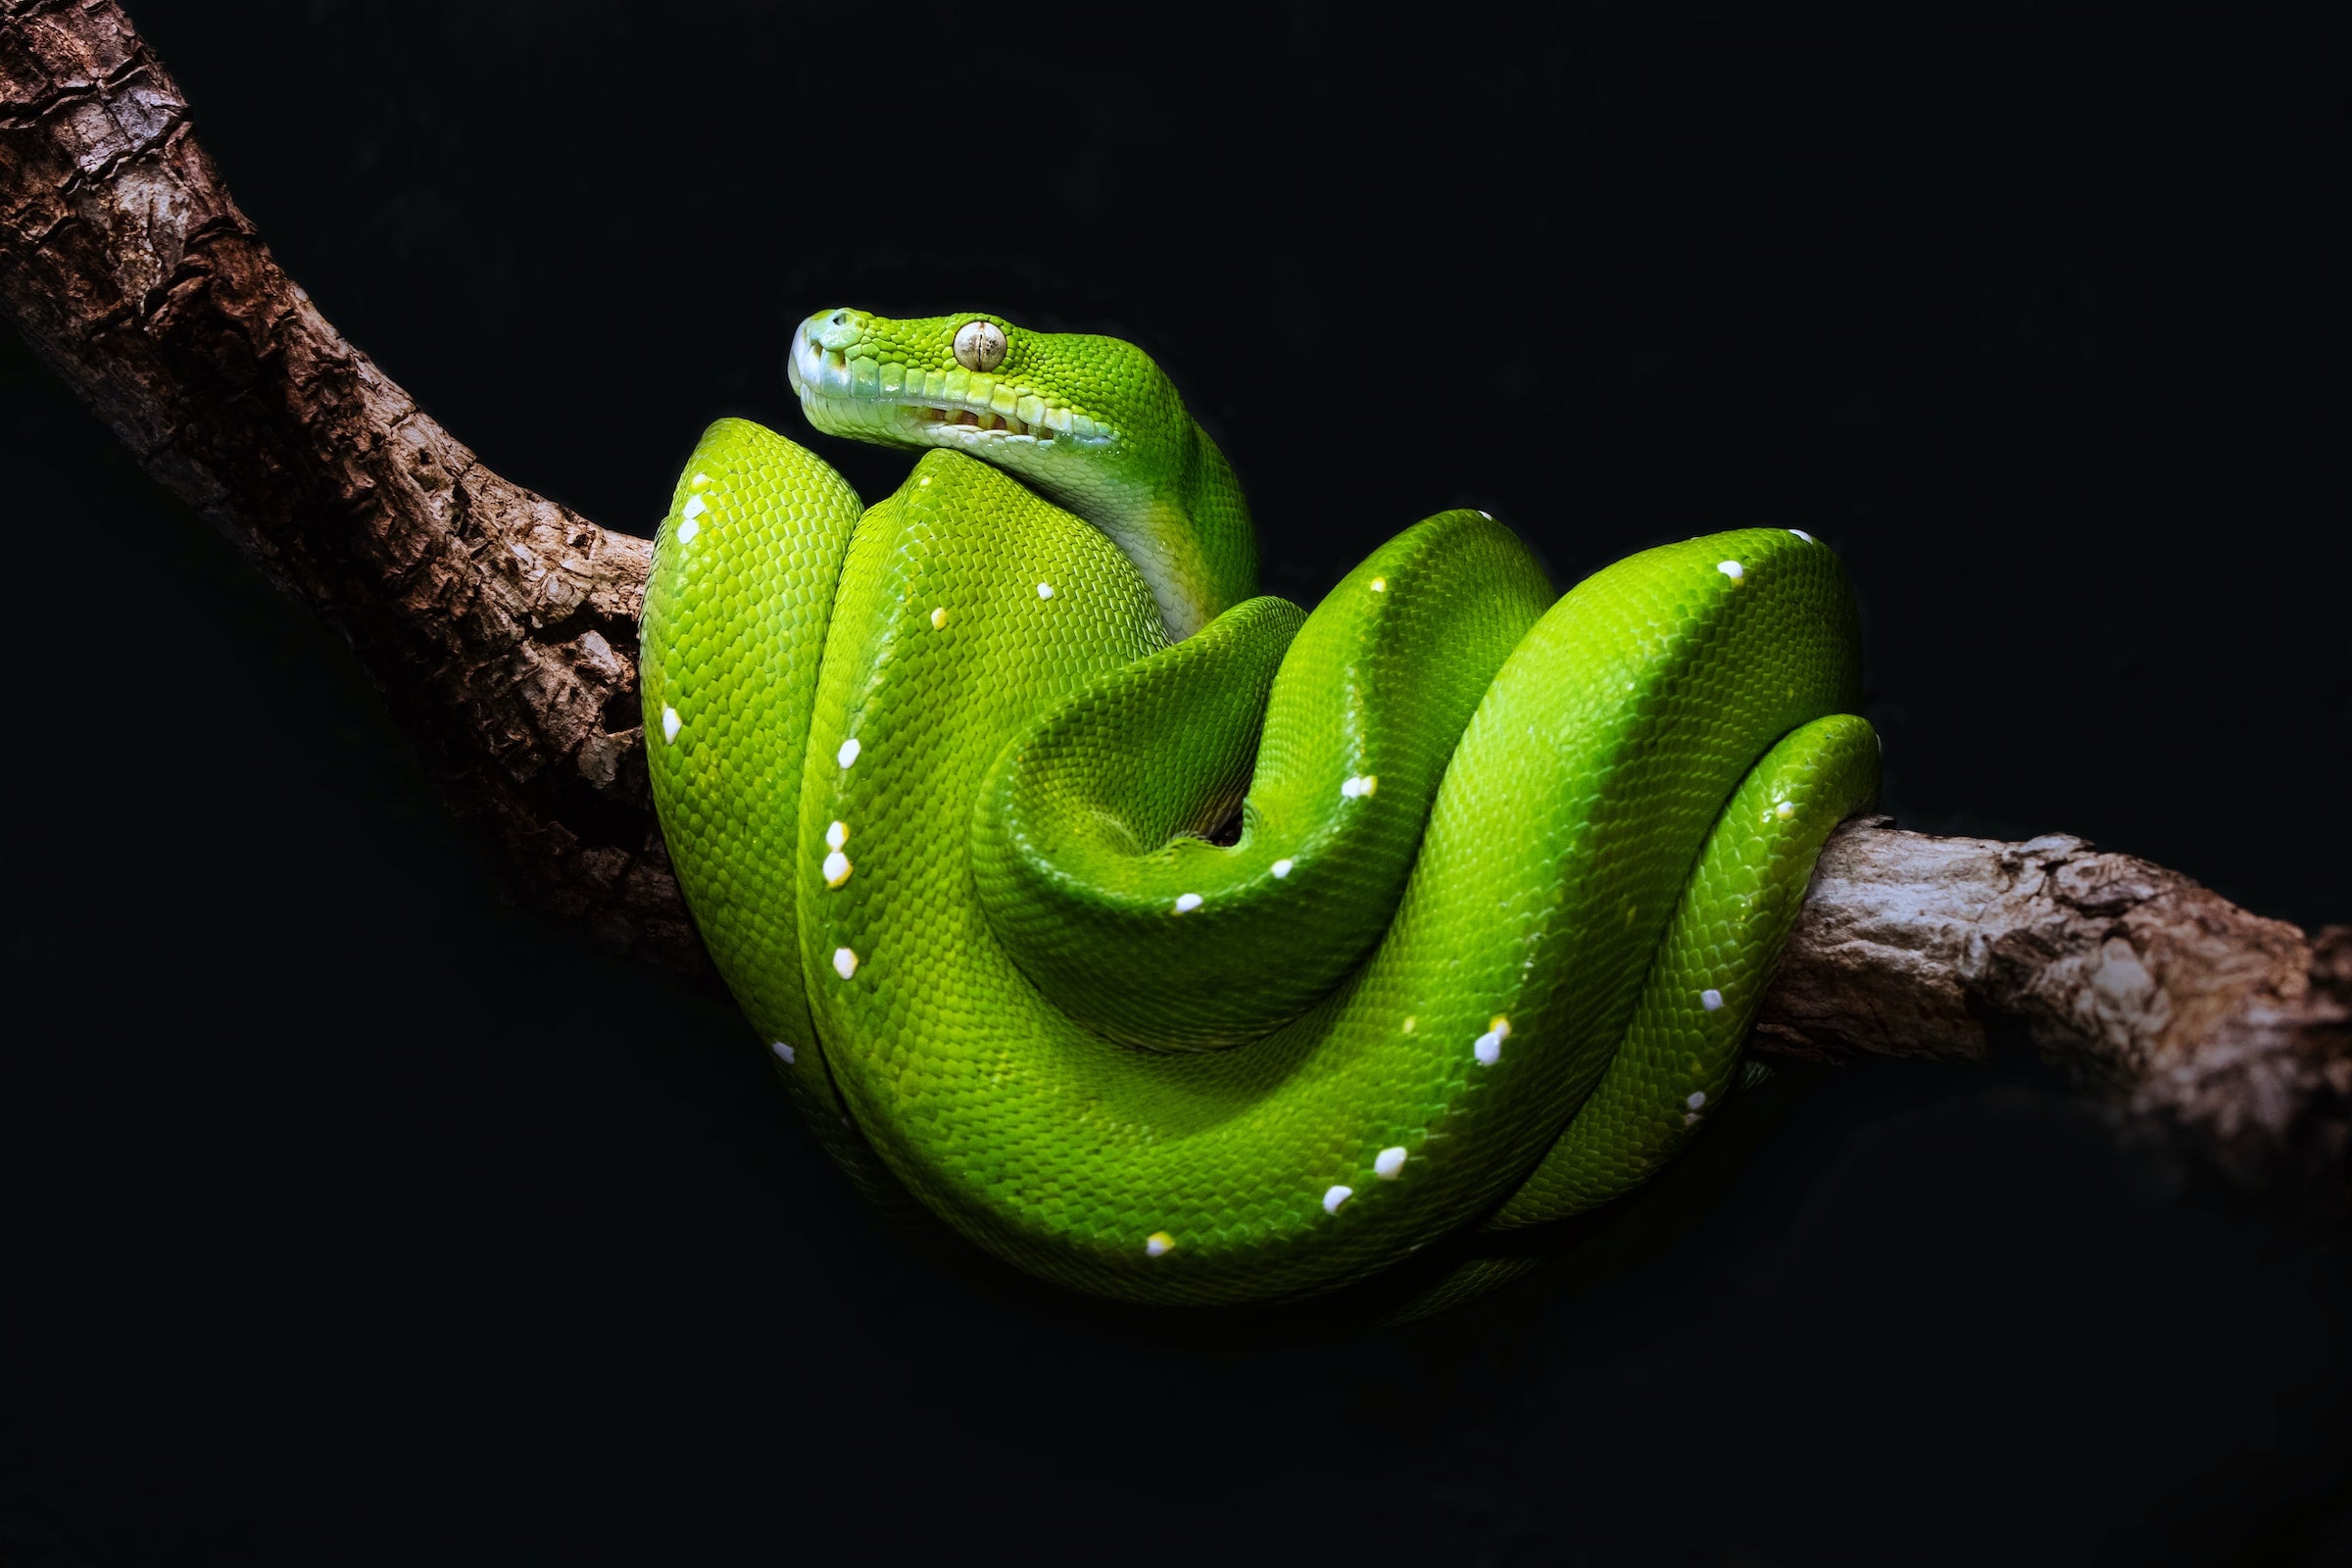 Python 3.11 is available and contains great improvements